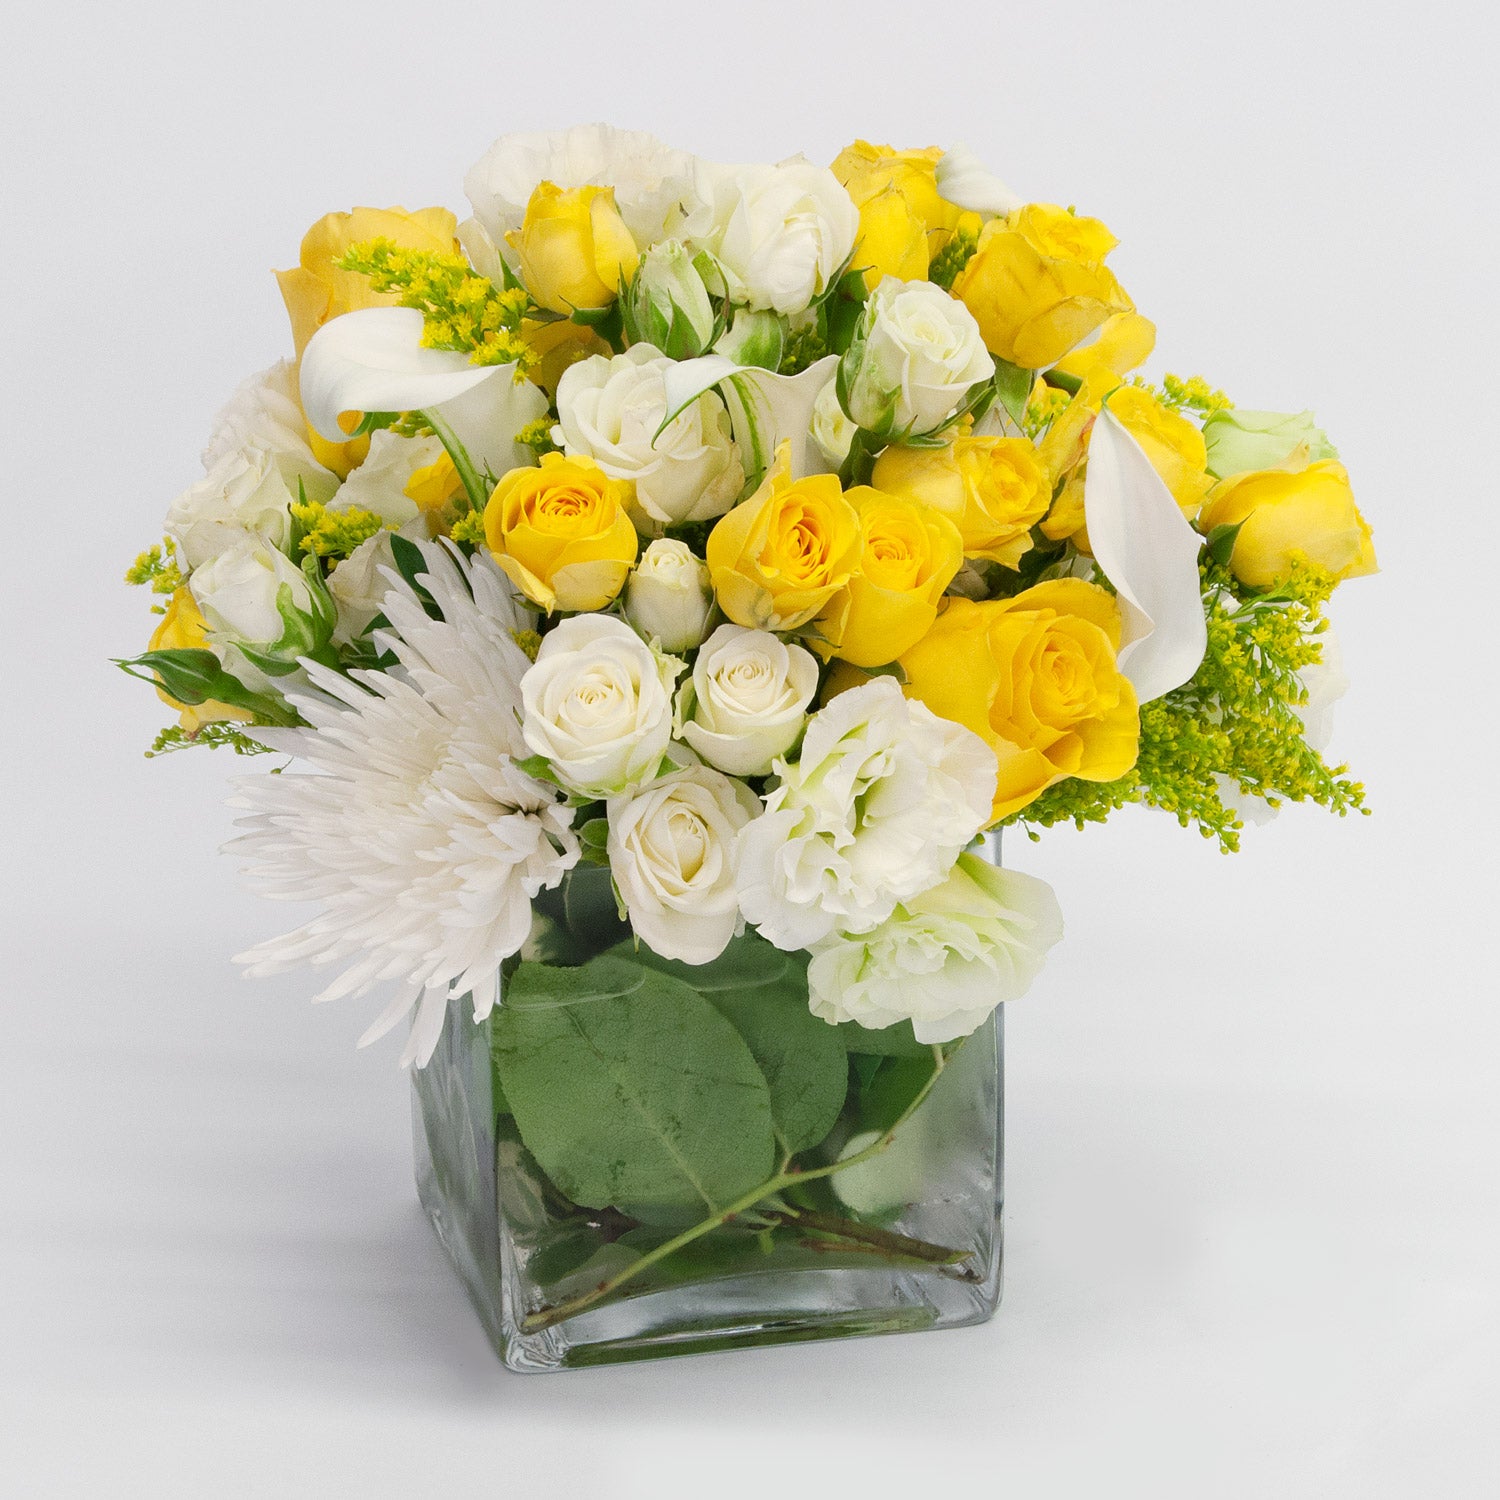 Exceptional Yellow and White Roses